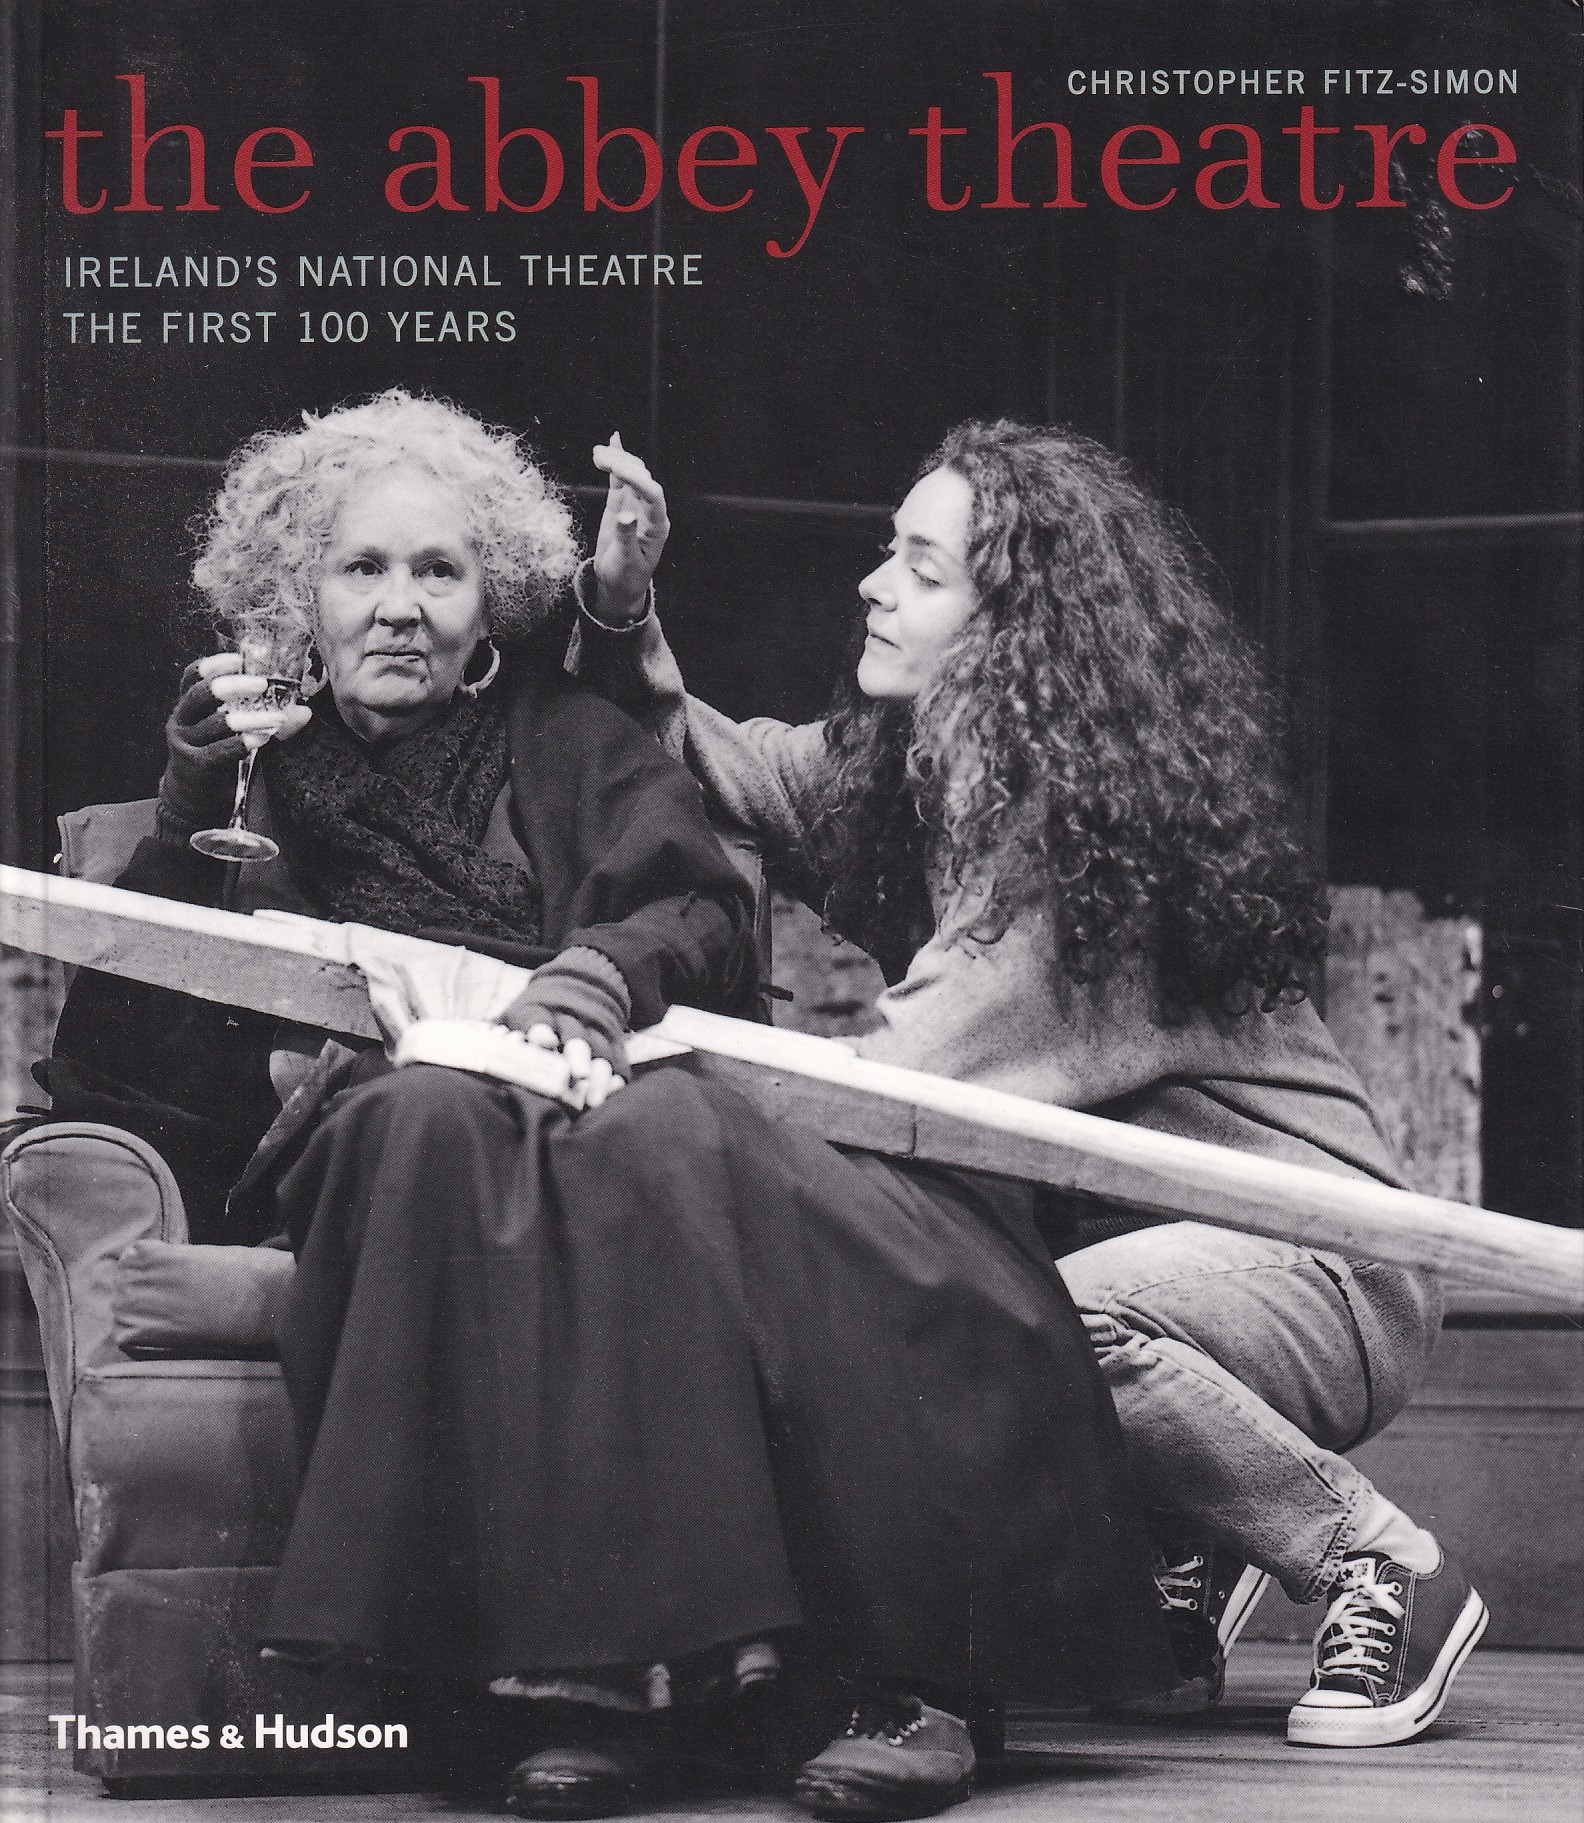 The Abbey Theatre: Ireland’s National Theatre, The First 100 Years | Christopher Fitz-Simon | Charlie Byrne's